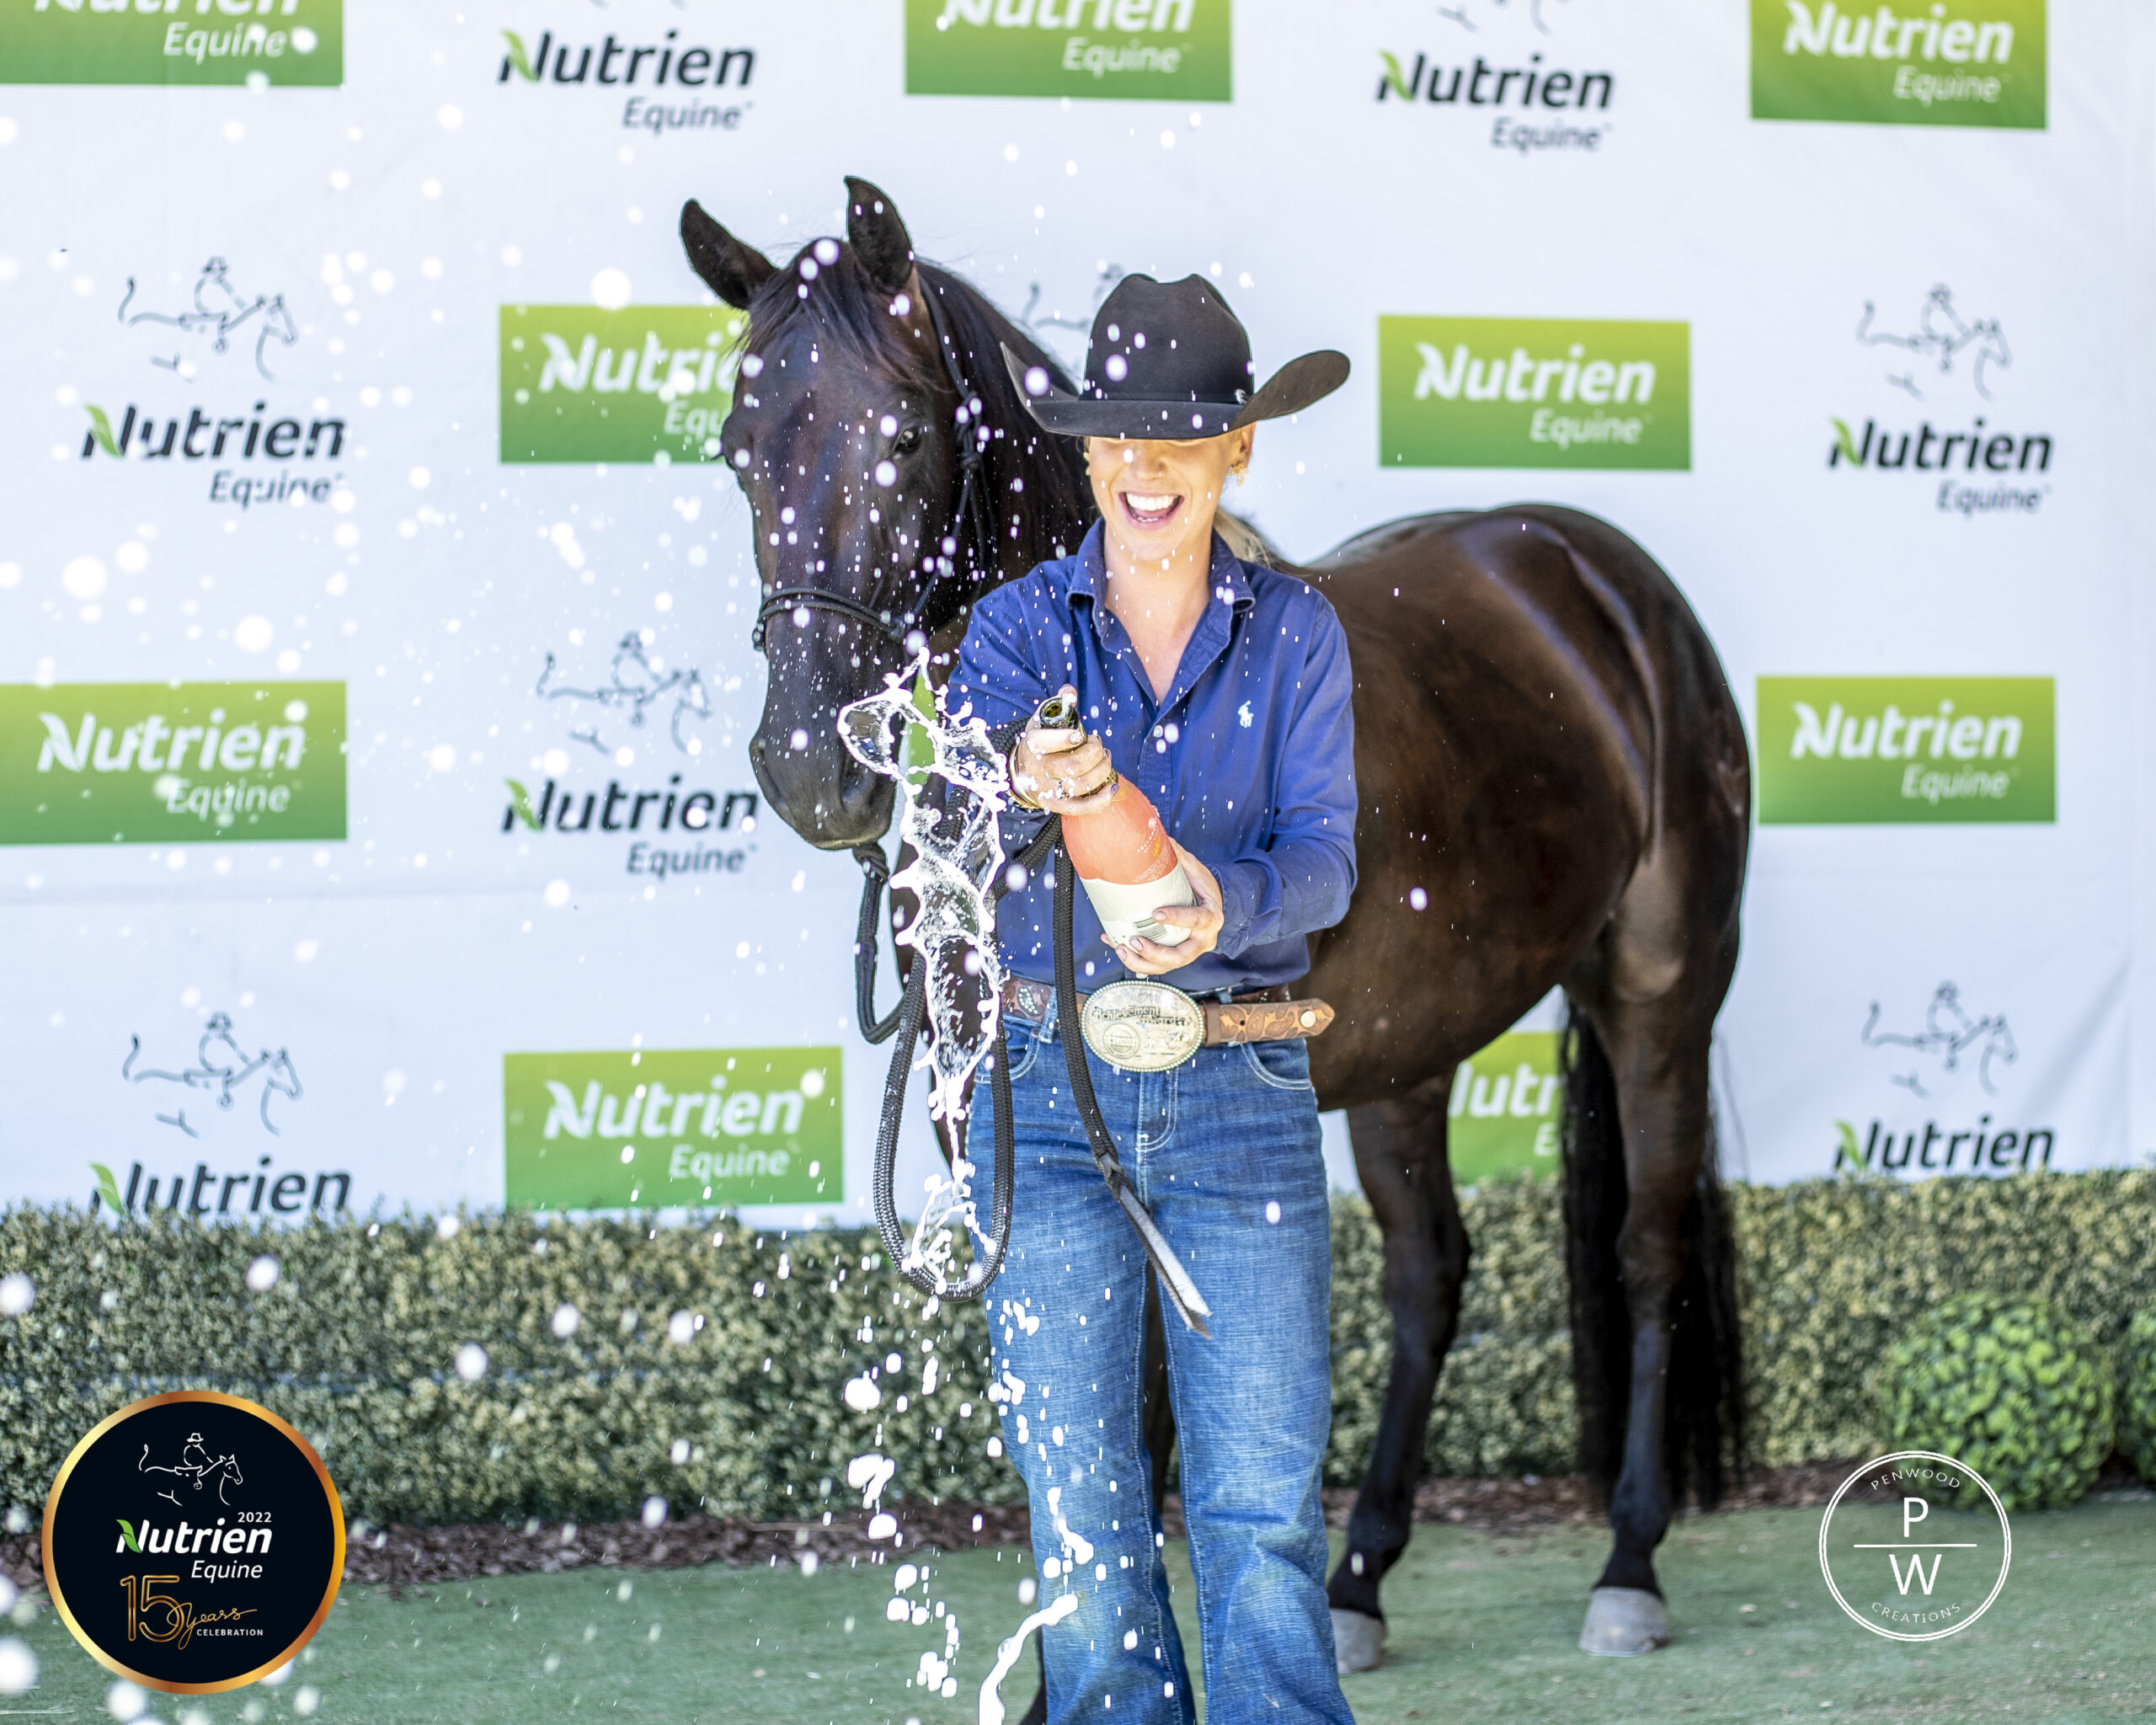 Phenomenal day with the 15th Nutrien Classic with record breaking prices